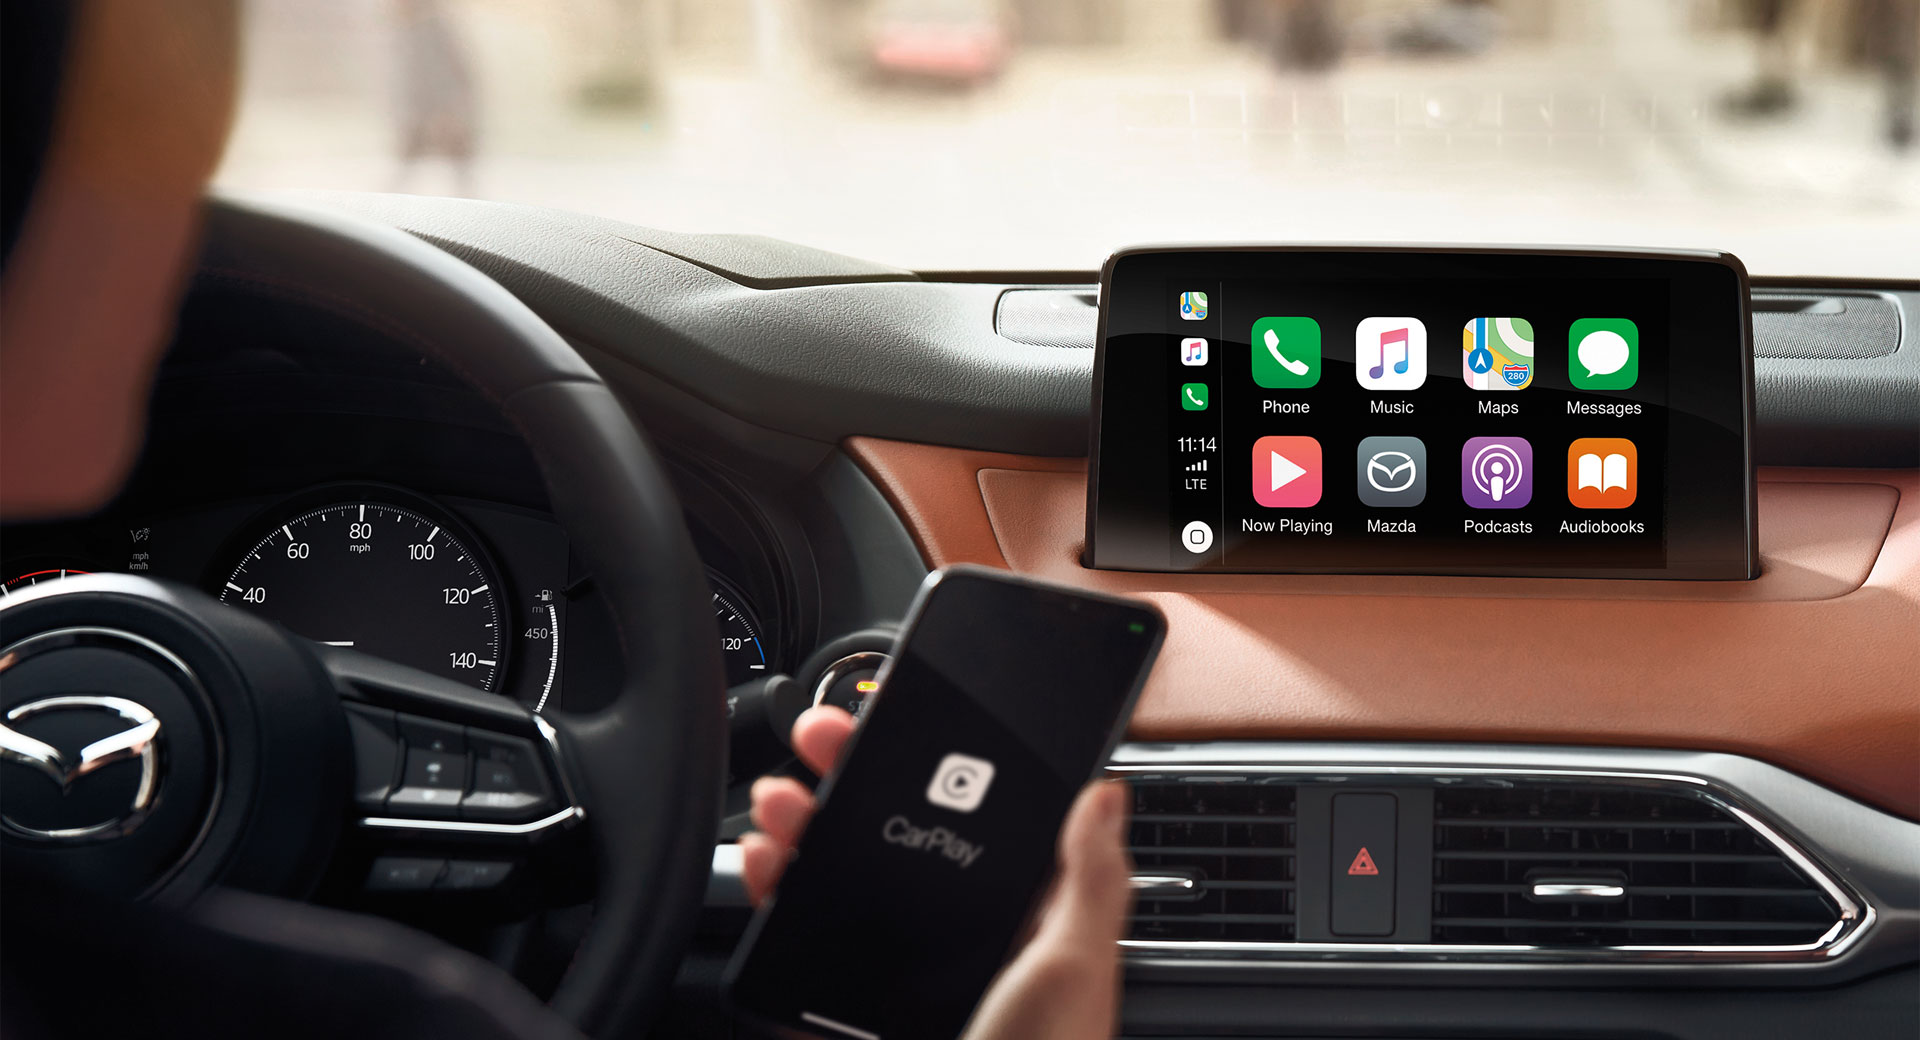 Upgrade Your Mazda With Apple CarPlay And Android Auto For